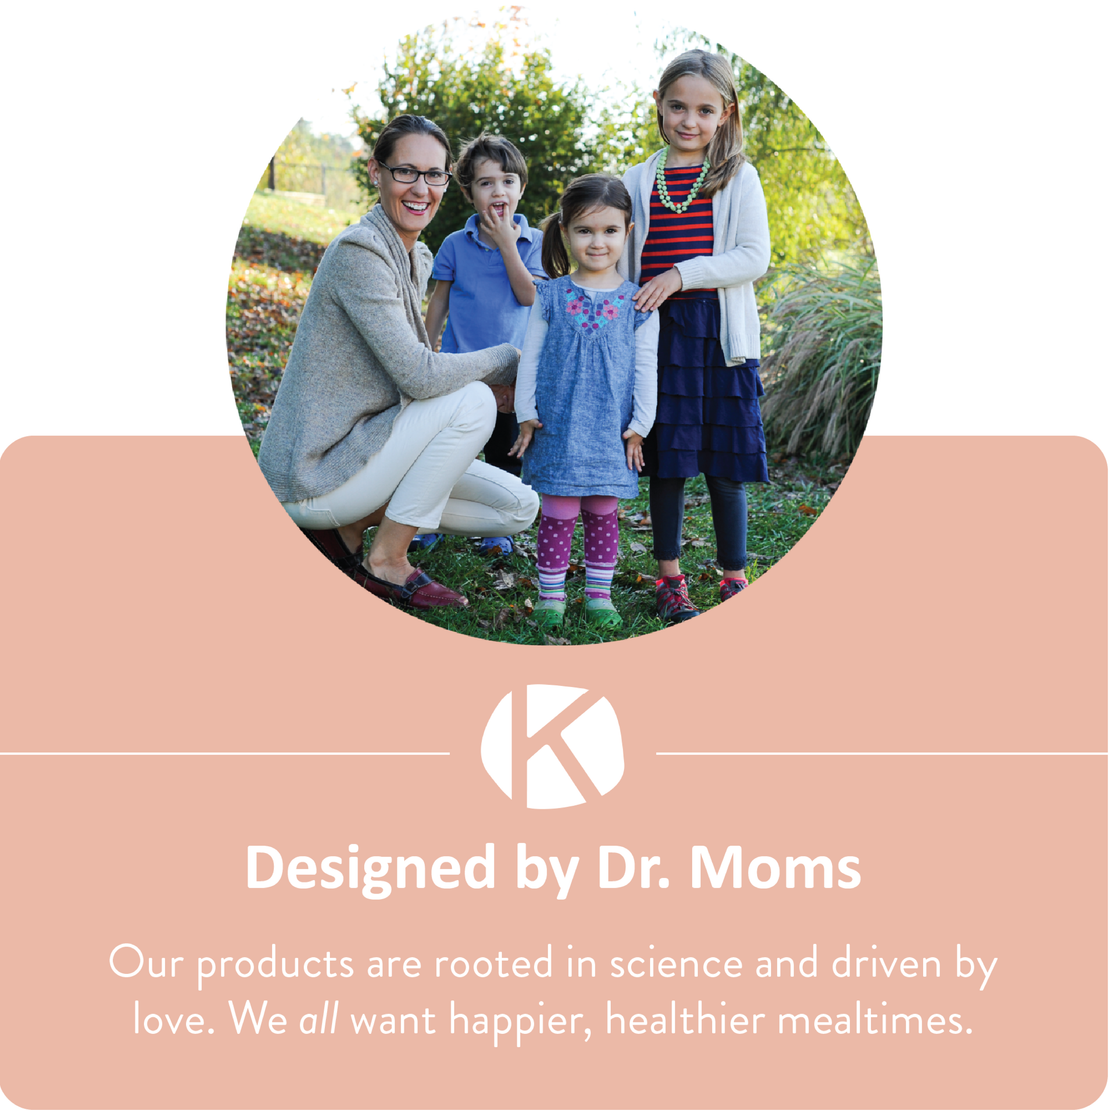 picture of mom and kids - inventor of curved spoons designed by doctor moms